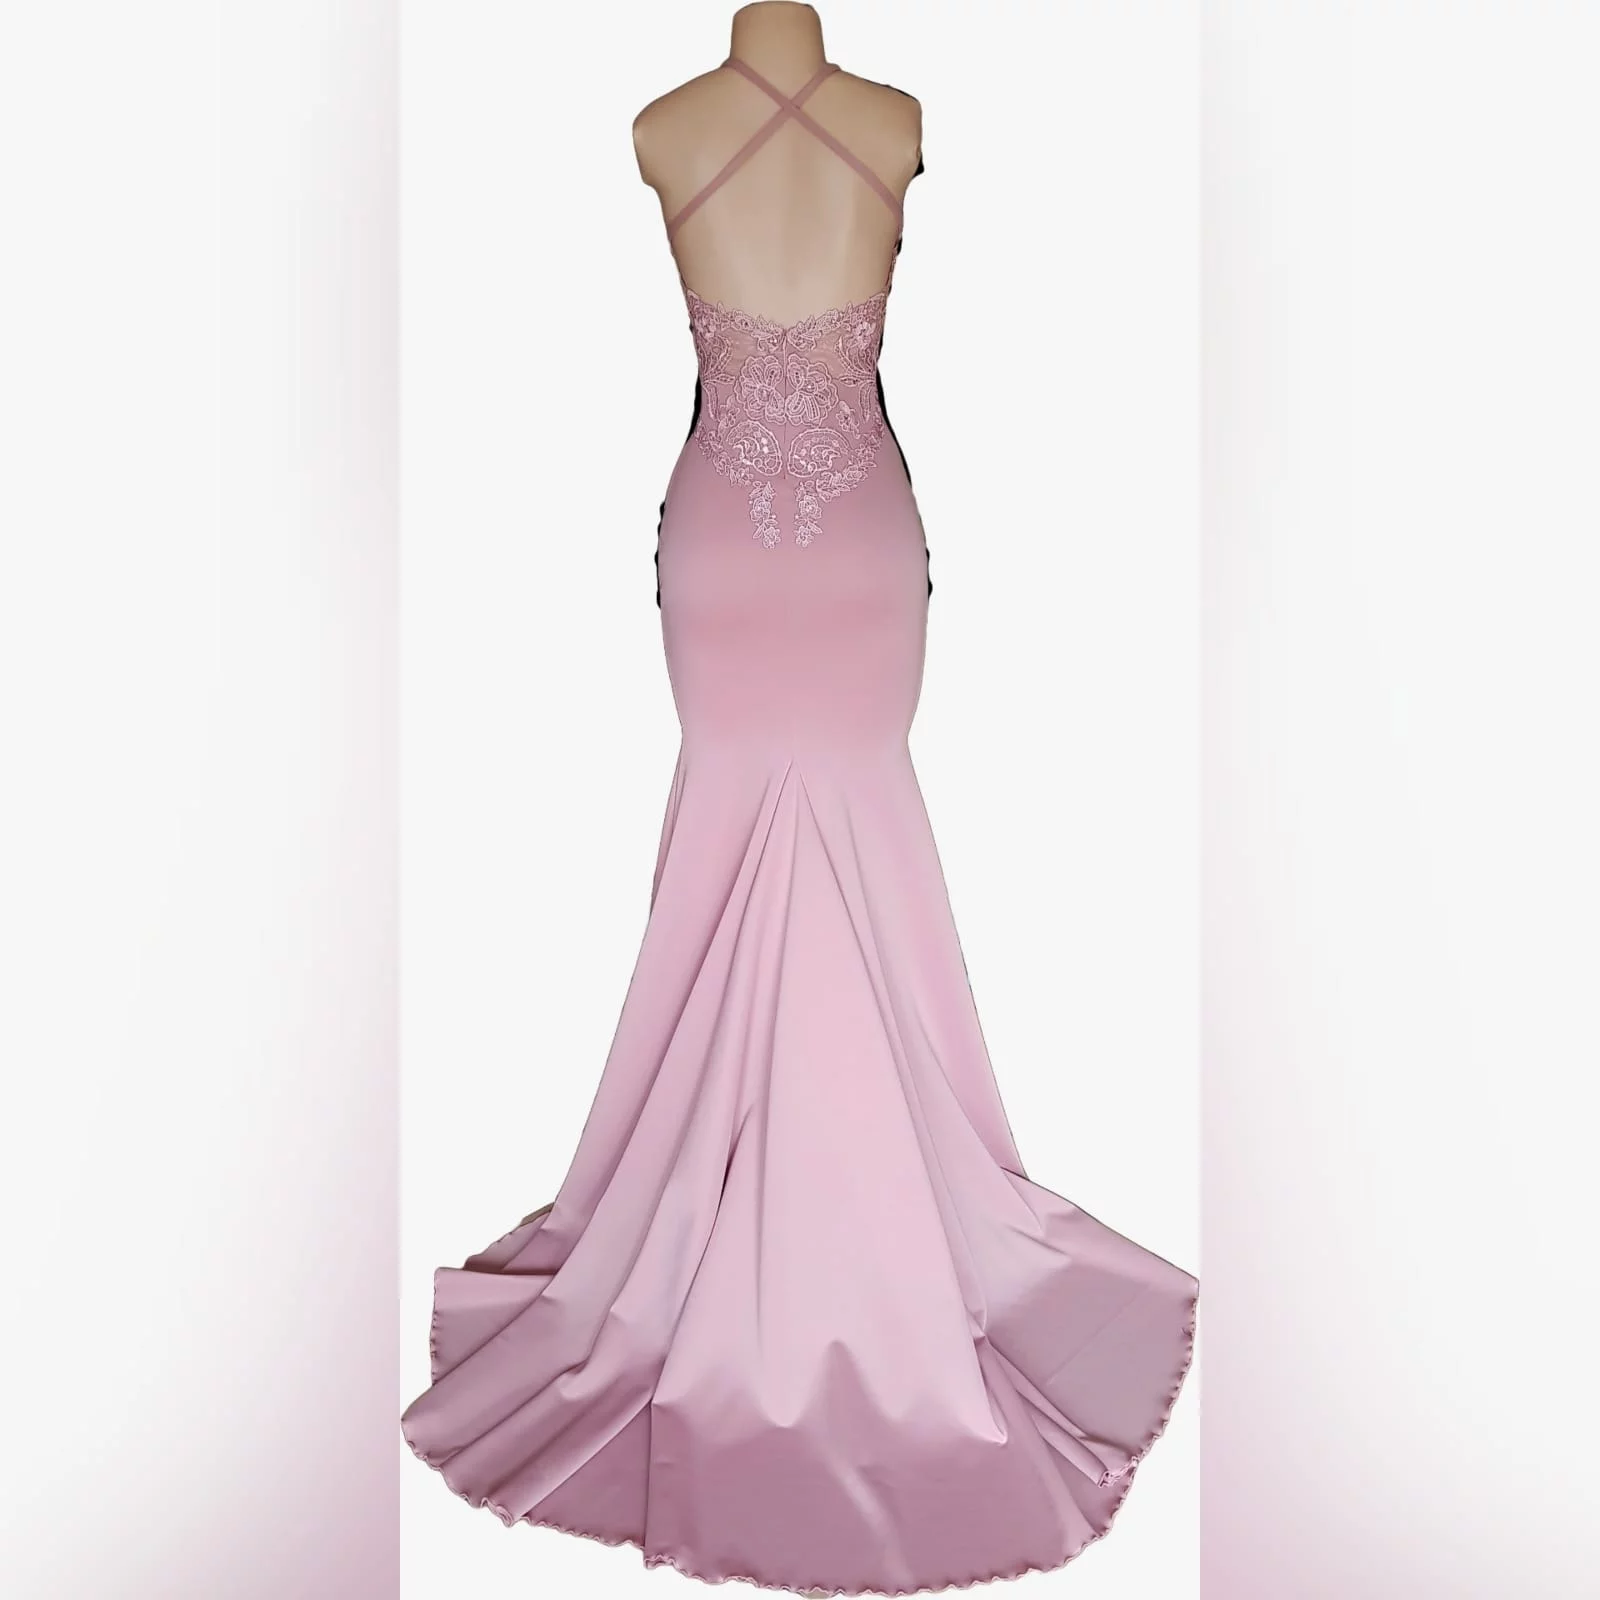 Pink sexy soft mermaid matric dance dress 5 look ravishing on your prom night with this pink sexy soft mermaid pink sexy soft mermaid matric dance dress. A fitted lace bodice with a plunging neckline, low back and a train to add some glamour to your important event.